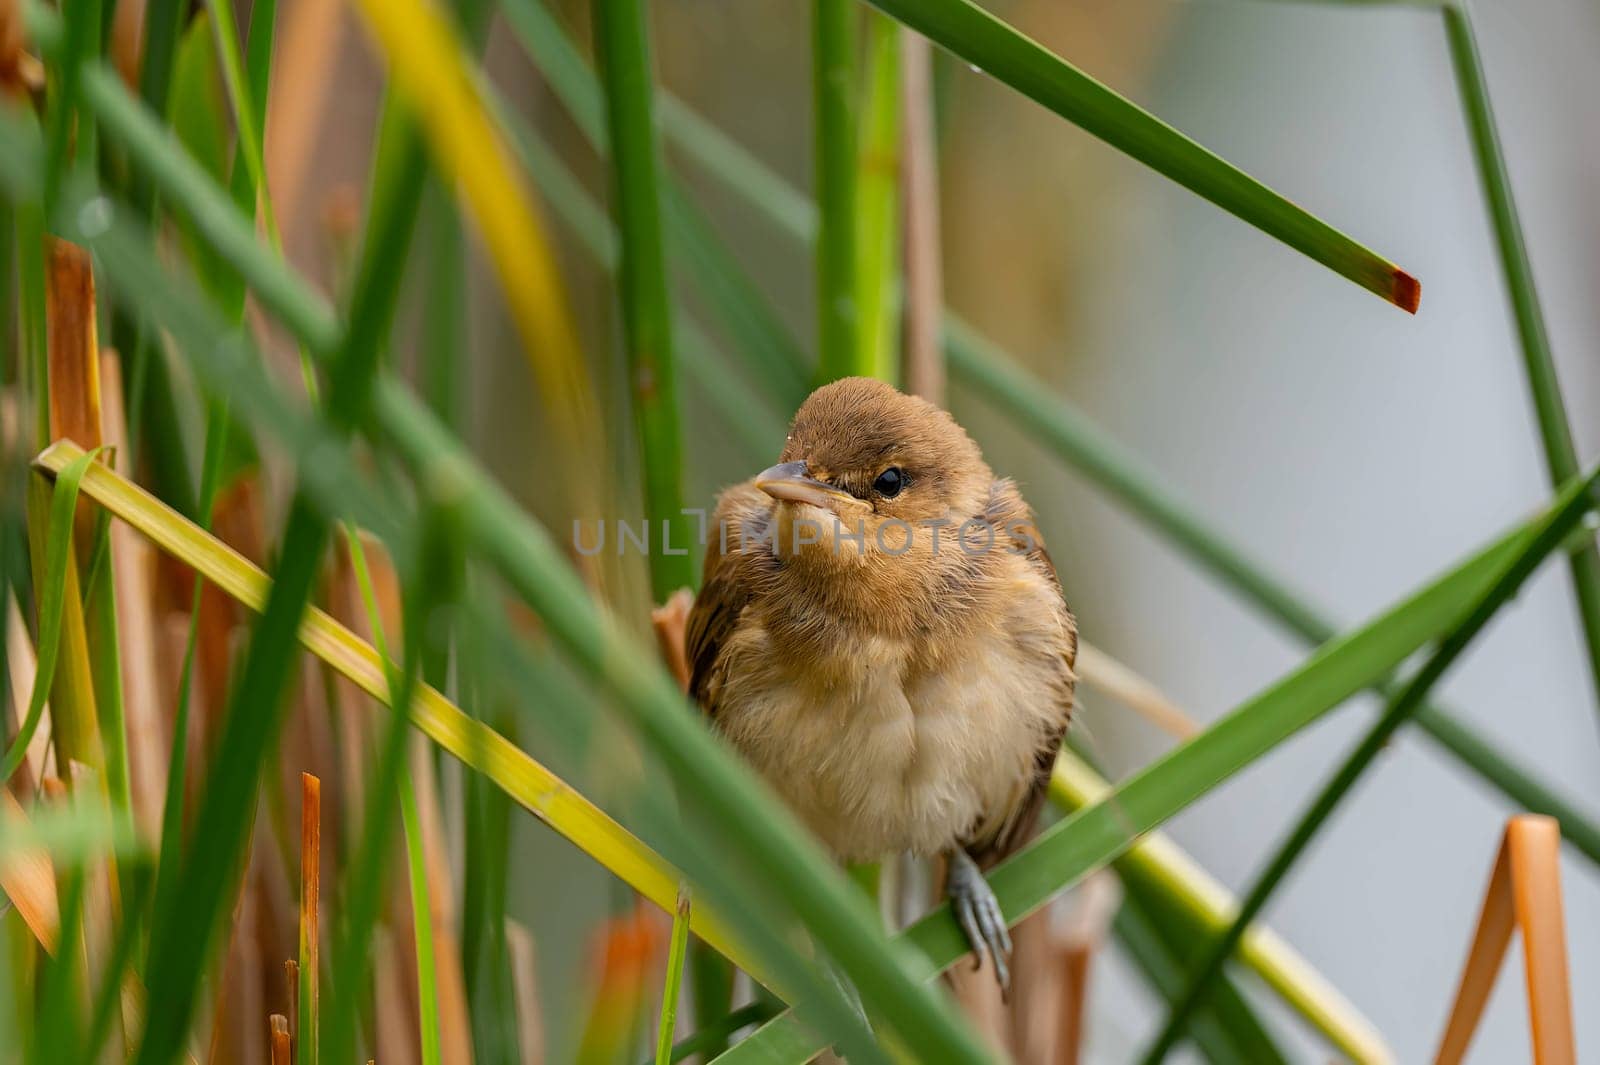 A Great Reed Warbler perched on the vibrant green grass, camouflaged amidst its natural surroundings.